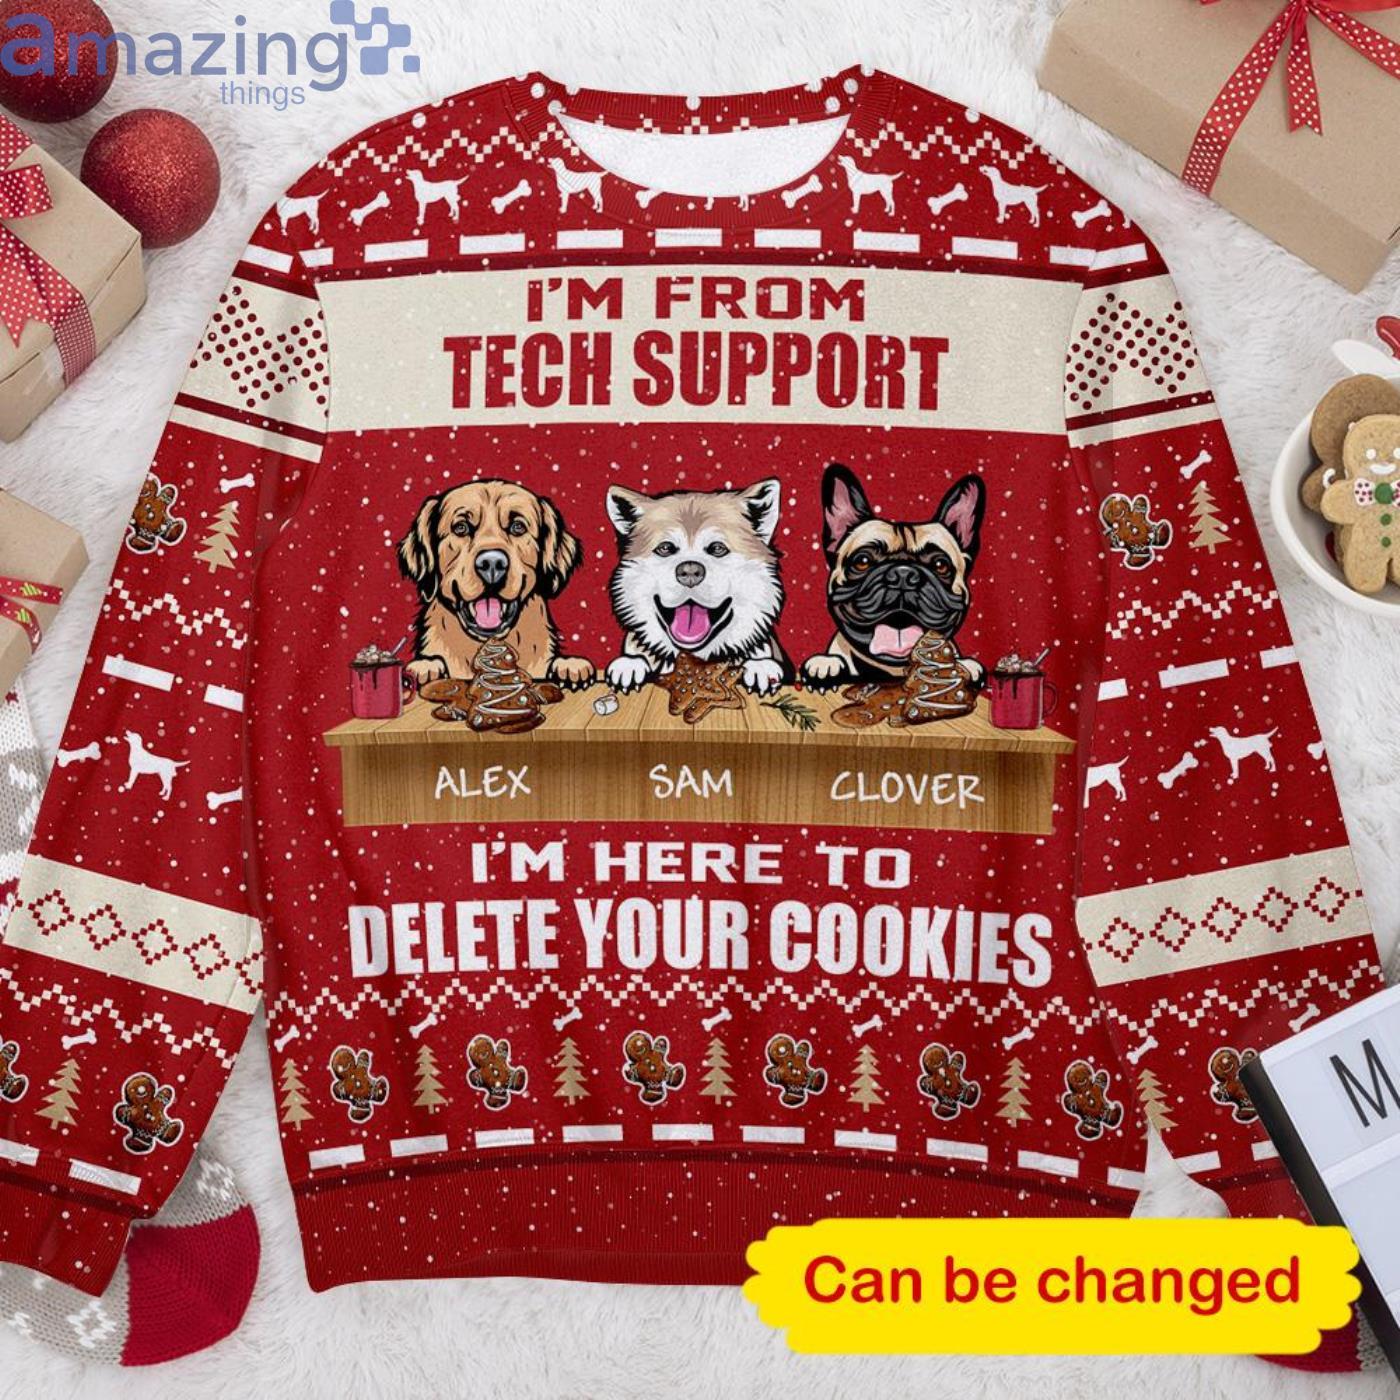 Here's Your New Favorite Ugly Christmas Sweater